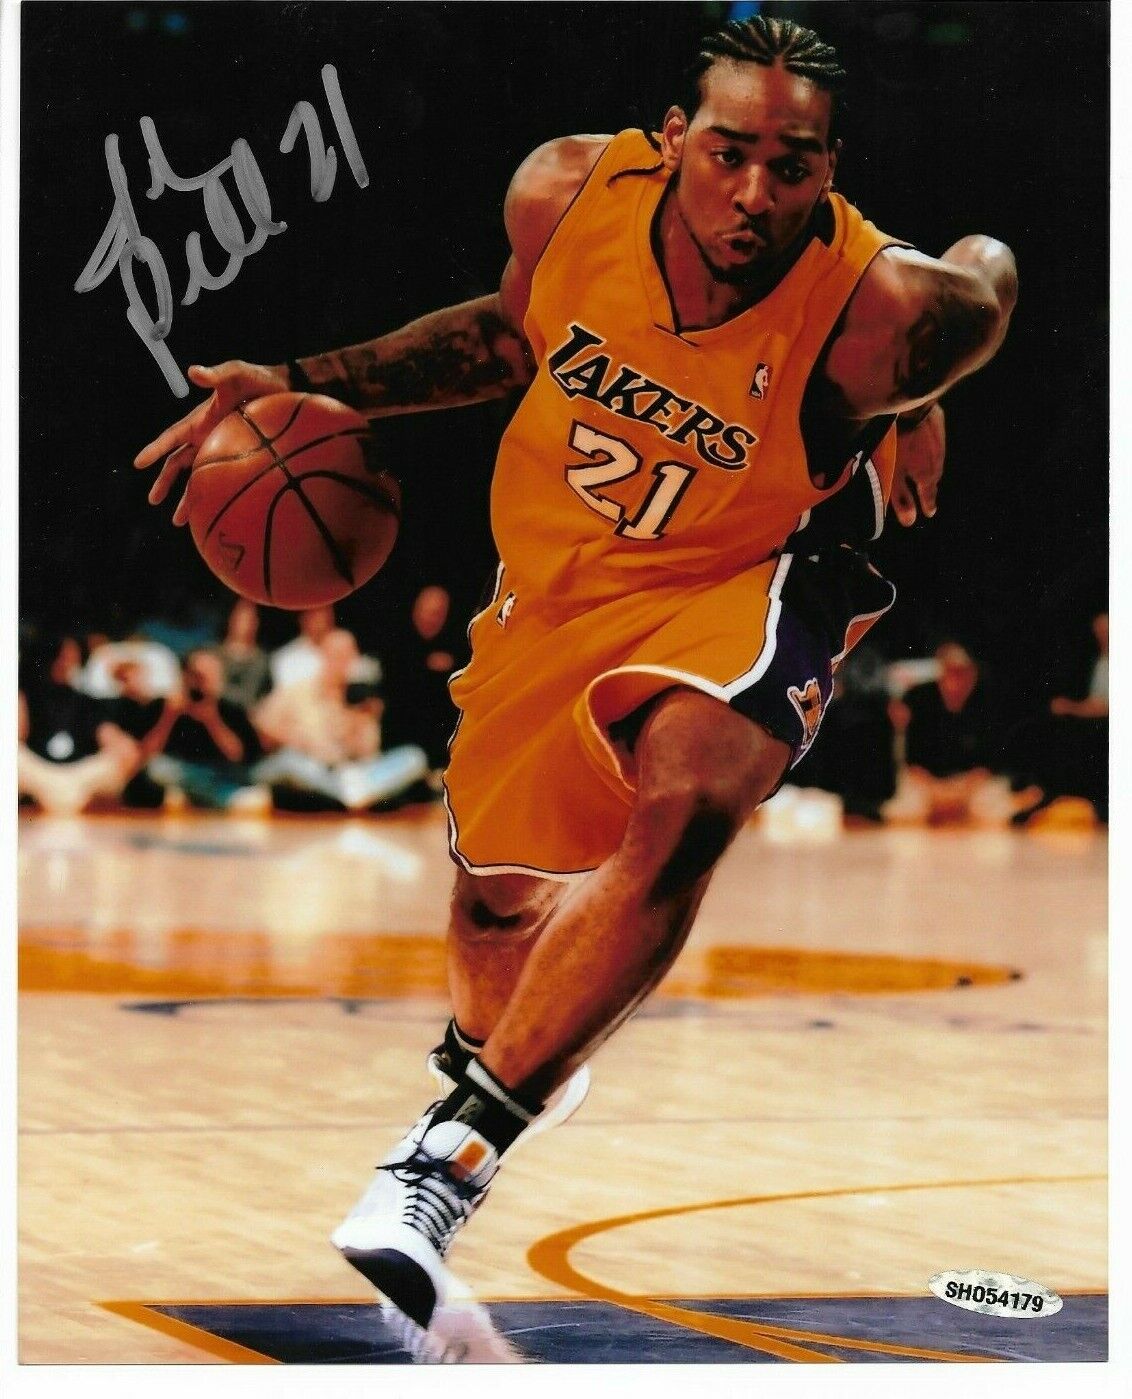 Josh Powell Autographed LA Lakers 8x10 Basketball Photo Poster painting UDA Signed Action Photo Poster painting